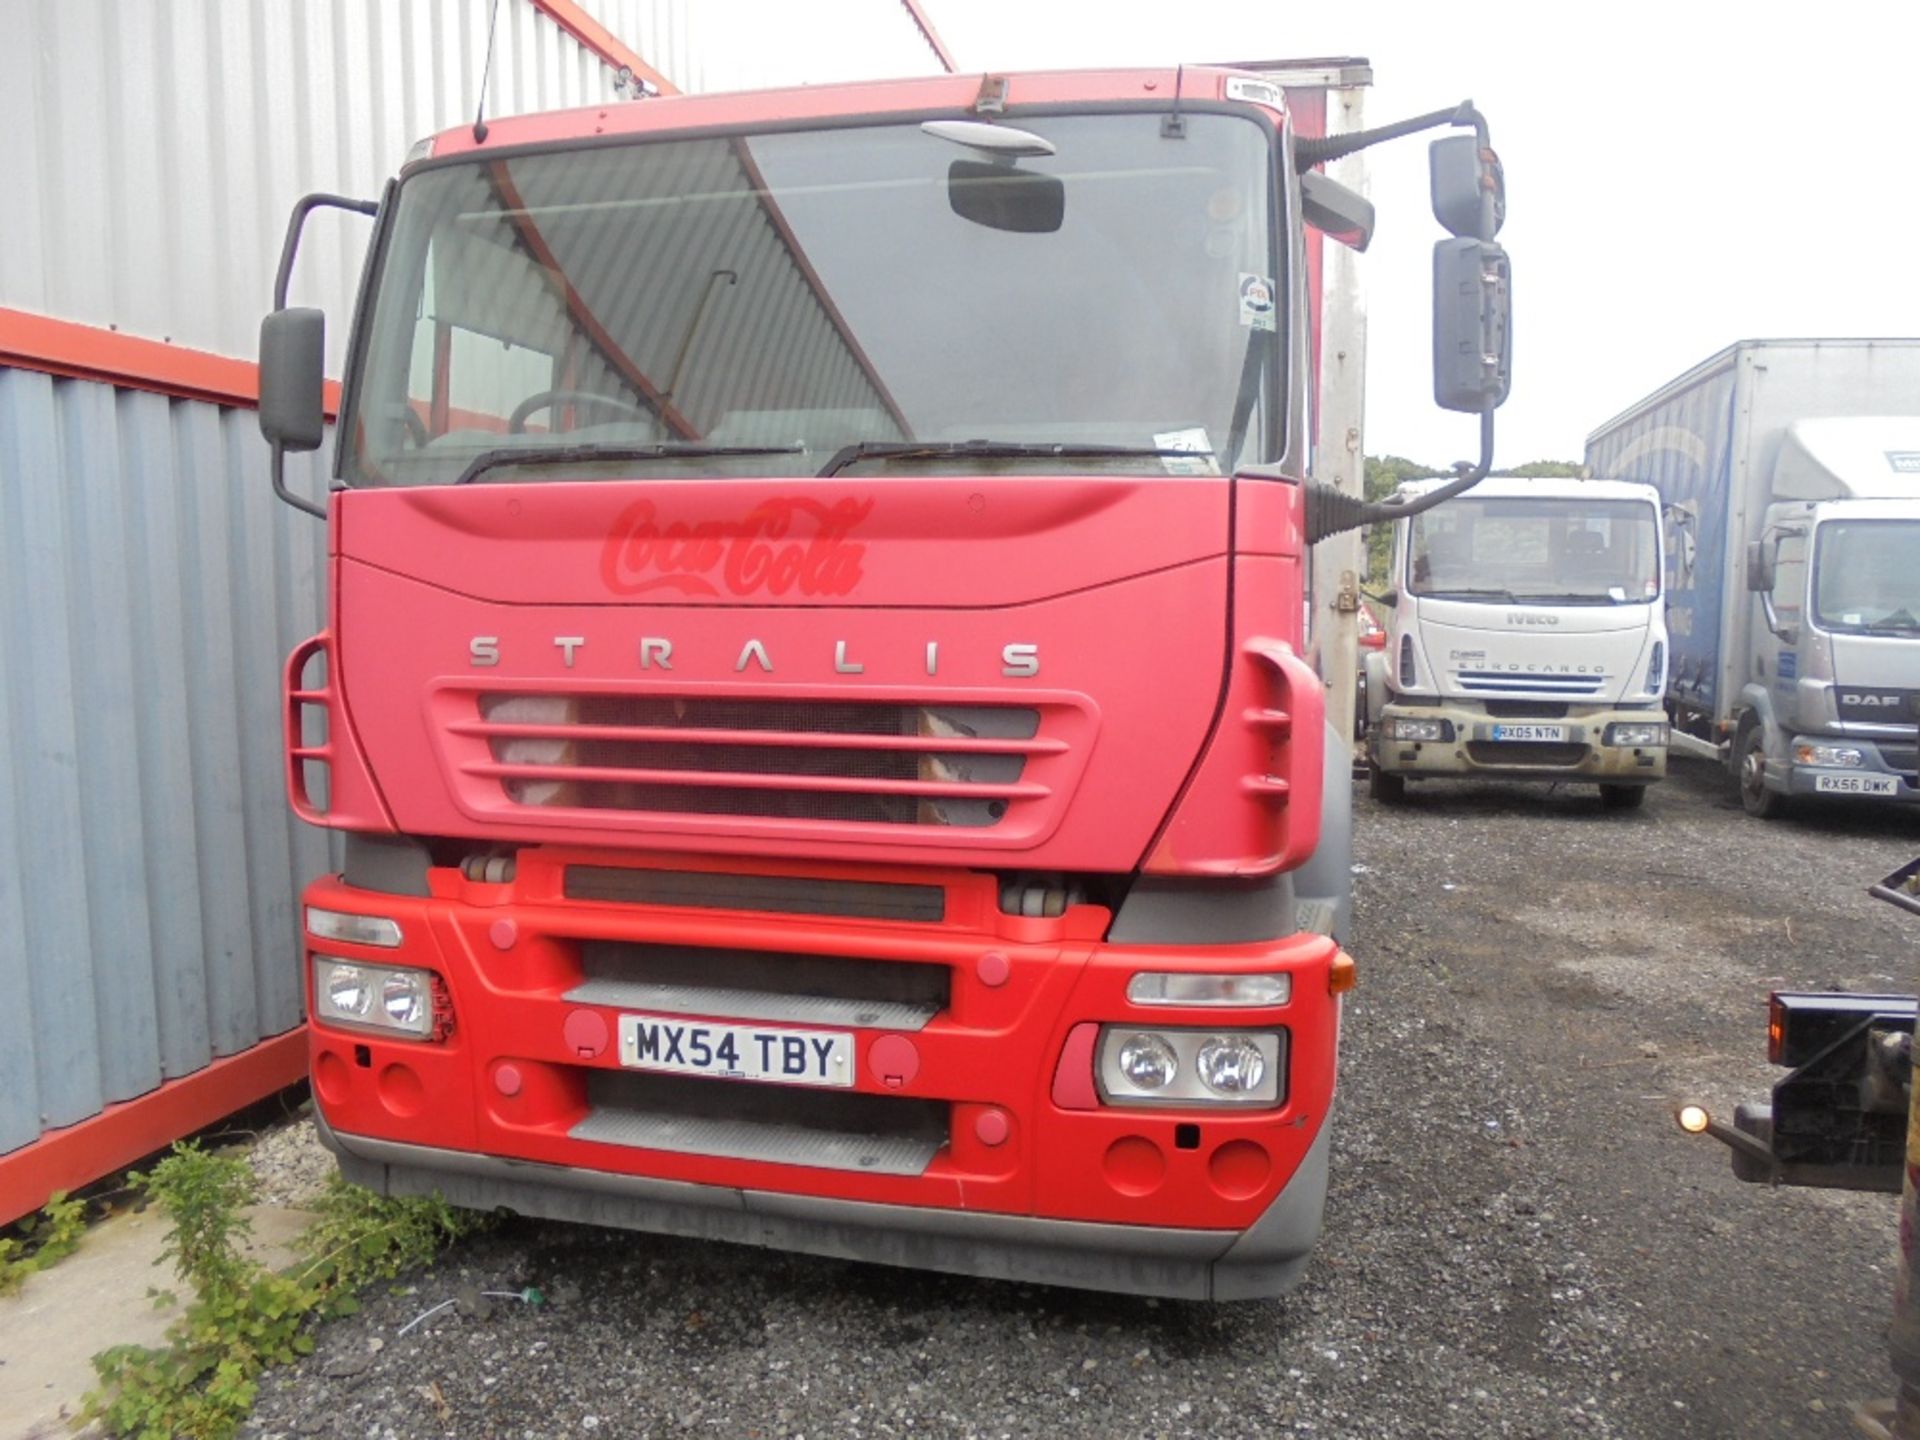 Iveco Stralis 310 6x2 Curtainsider c/w Ratcliffe Column Tail Lift, Registration No. MX54 TBY, First